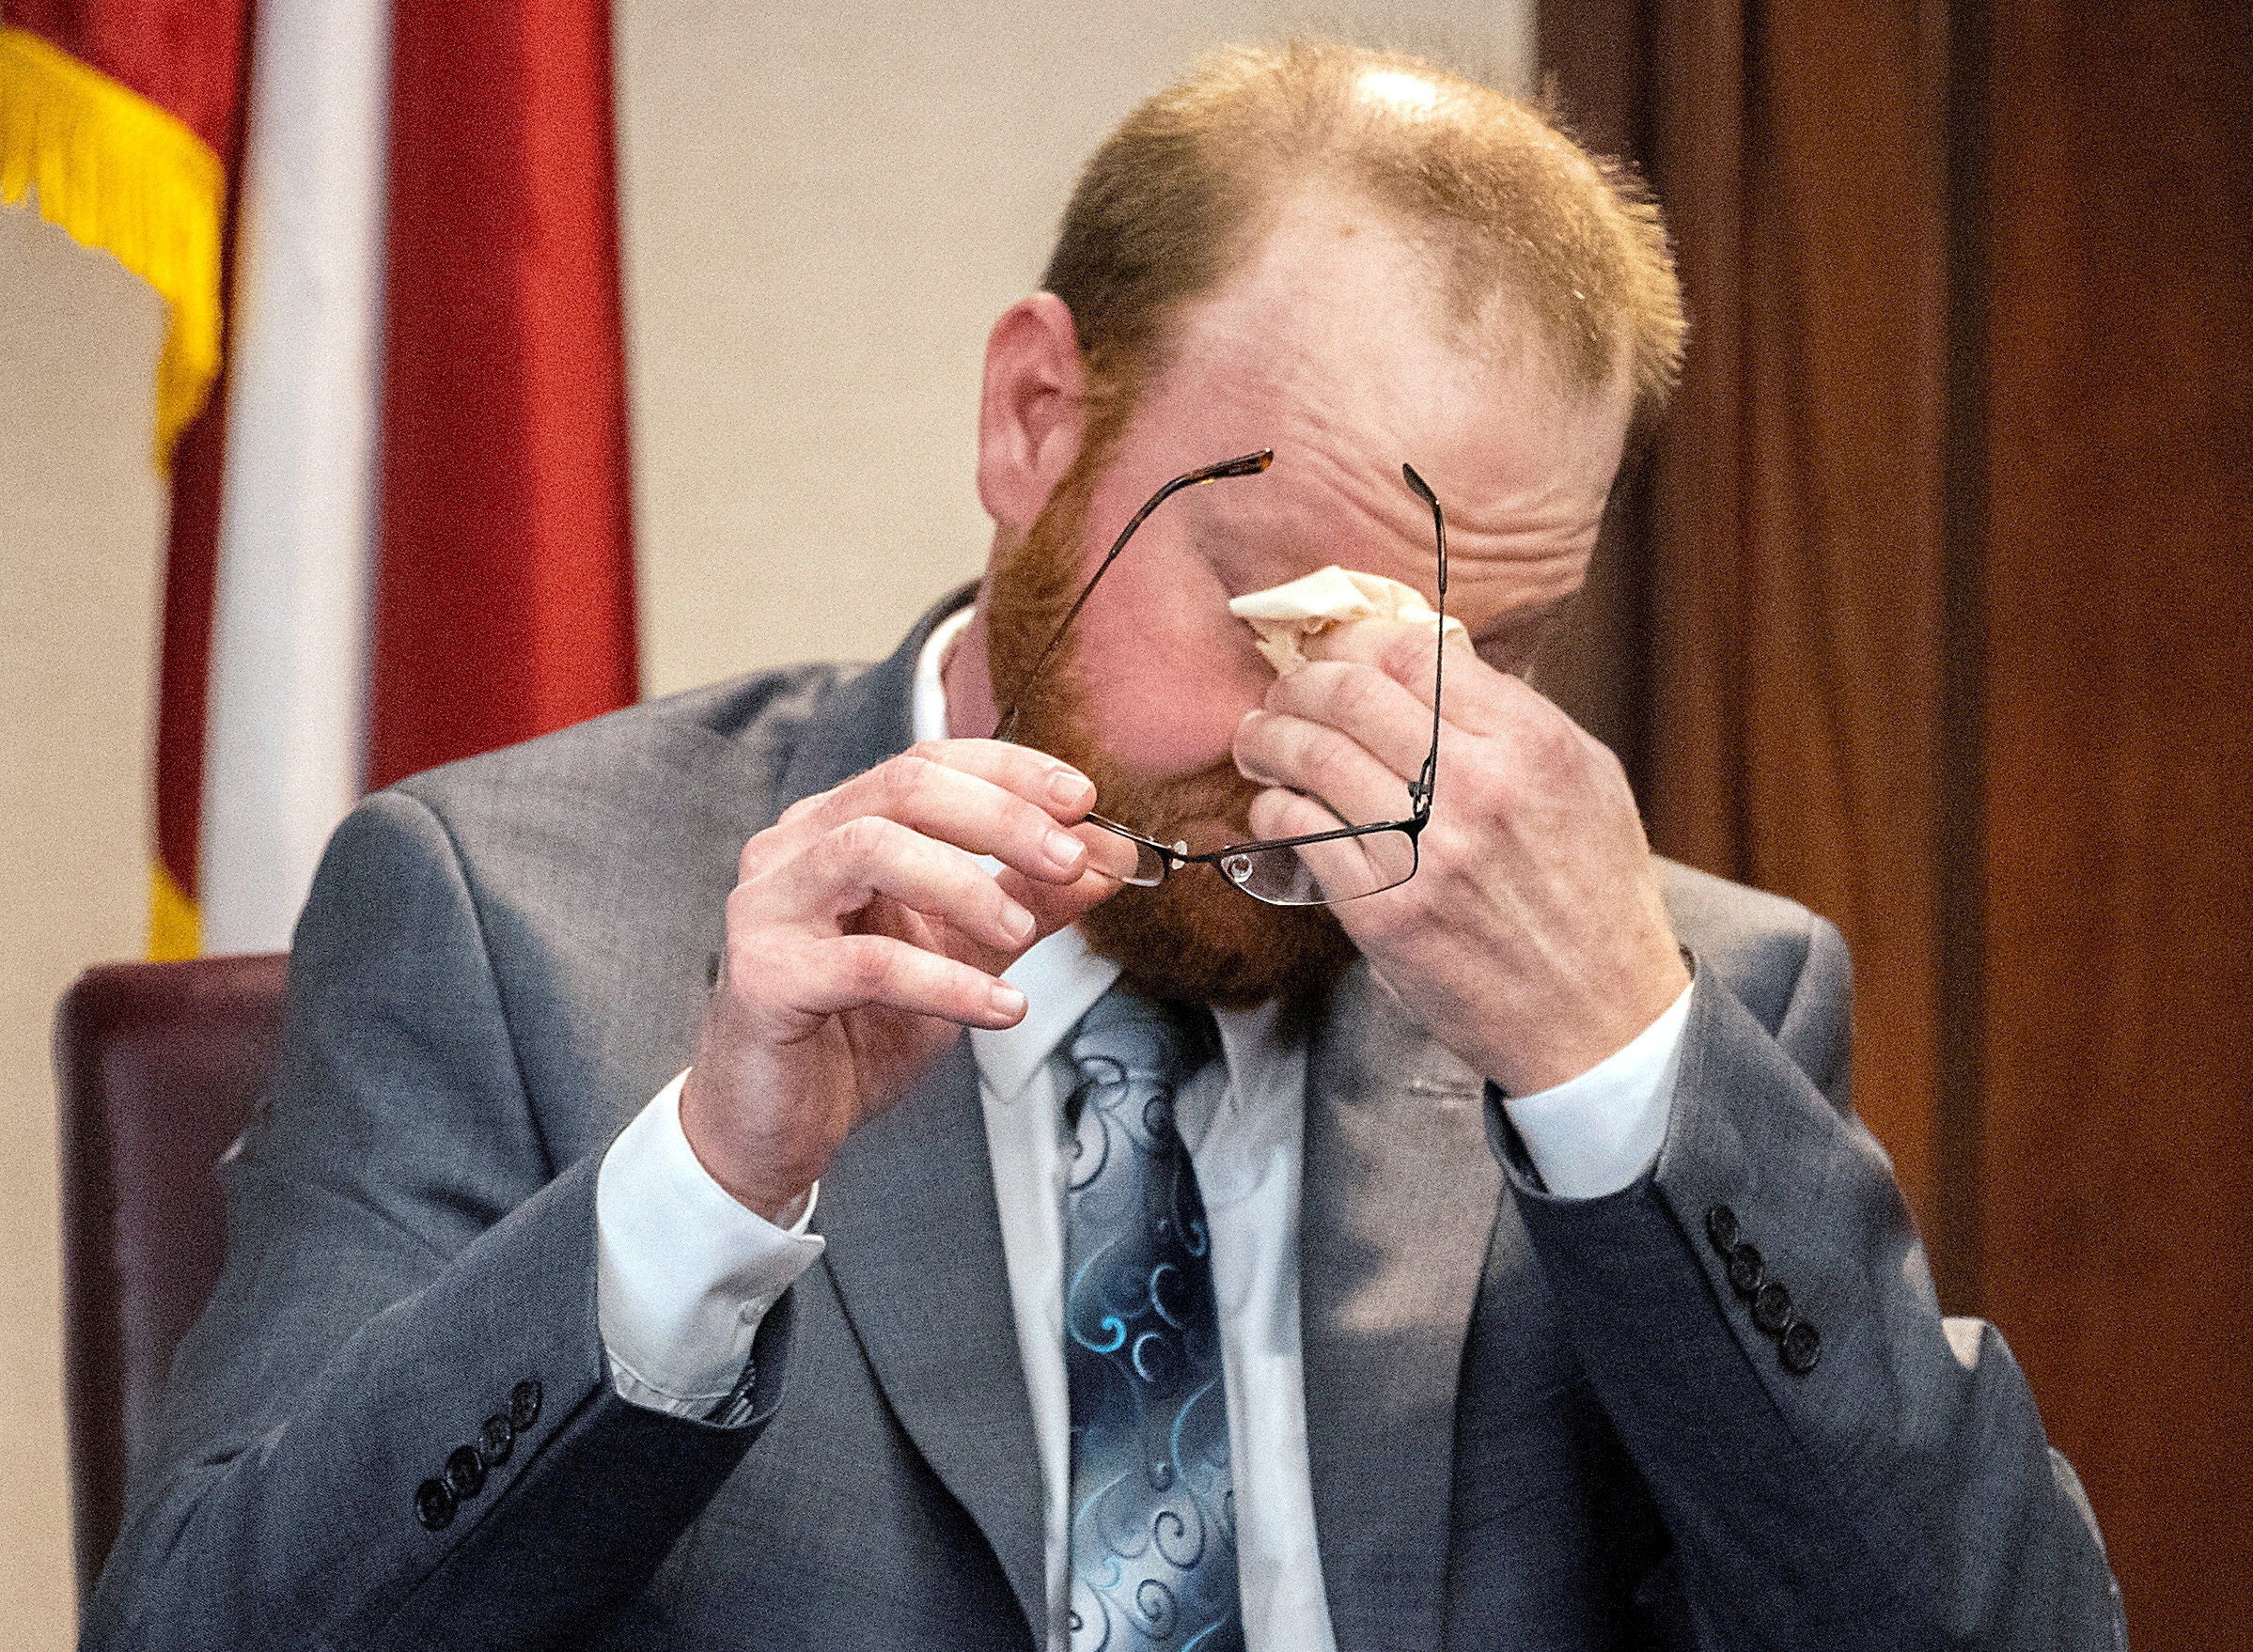 Travis McMichael wipes his eyes as he testifies about shooting dead Ahmaud Arbery on 23 February 2020